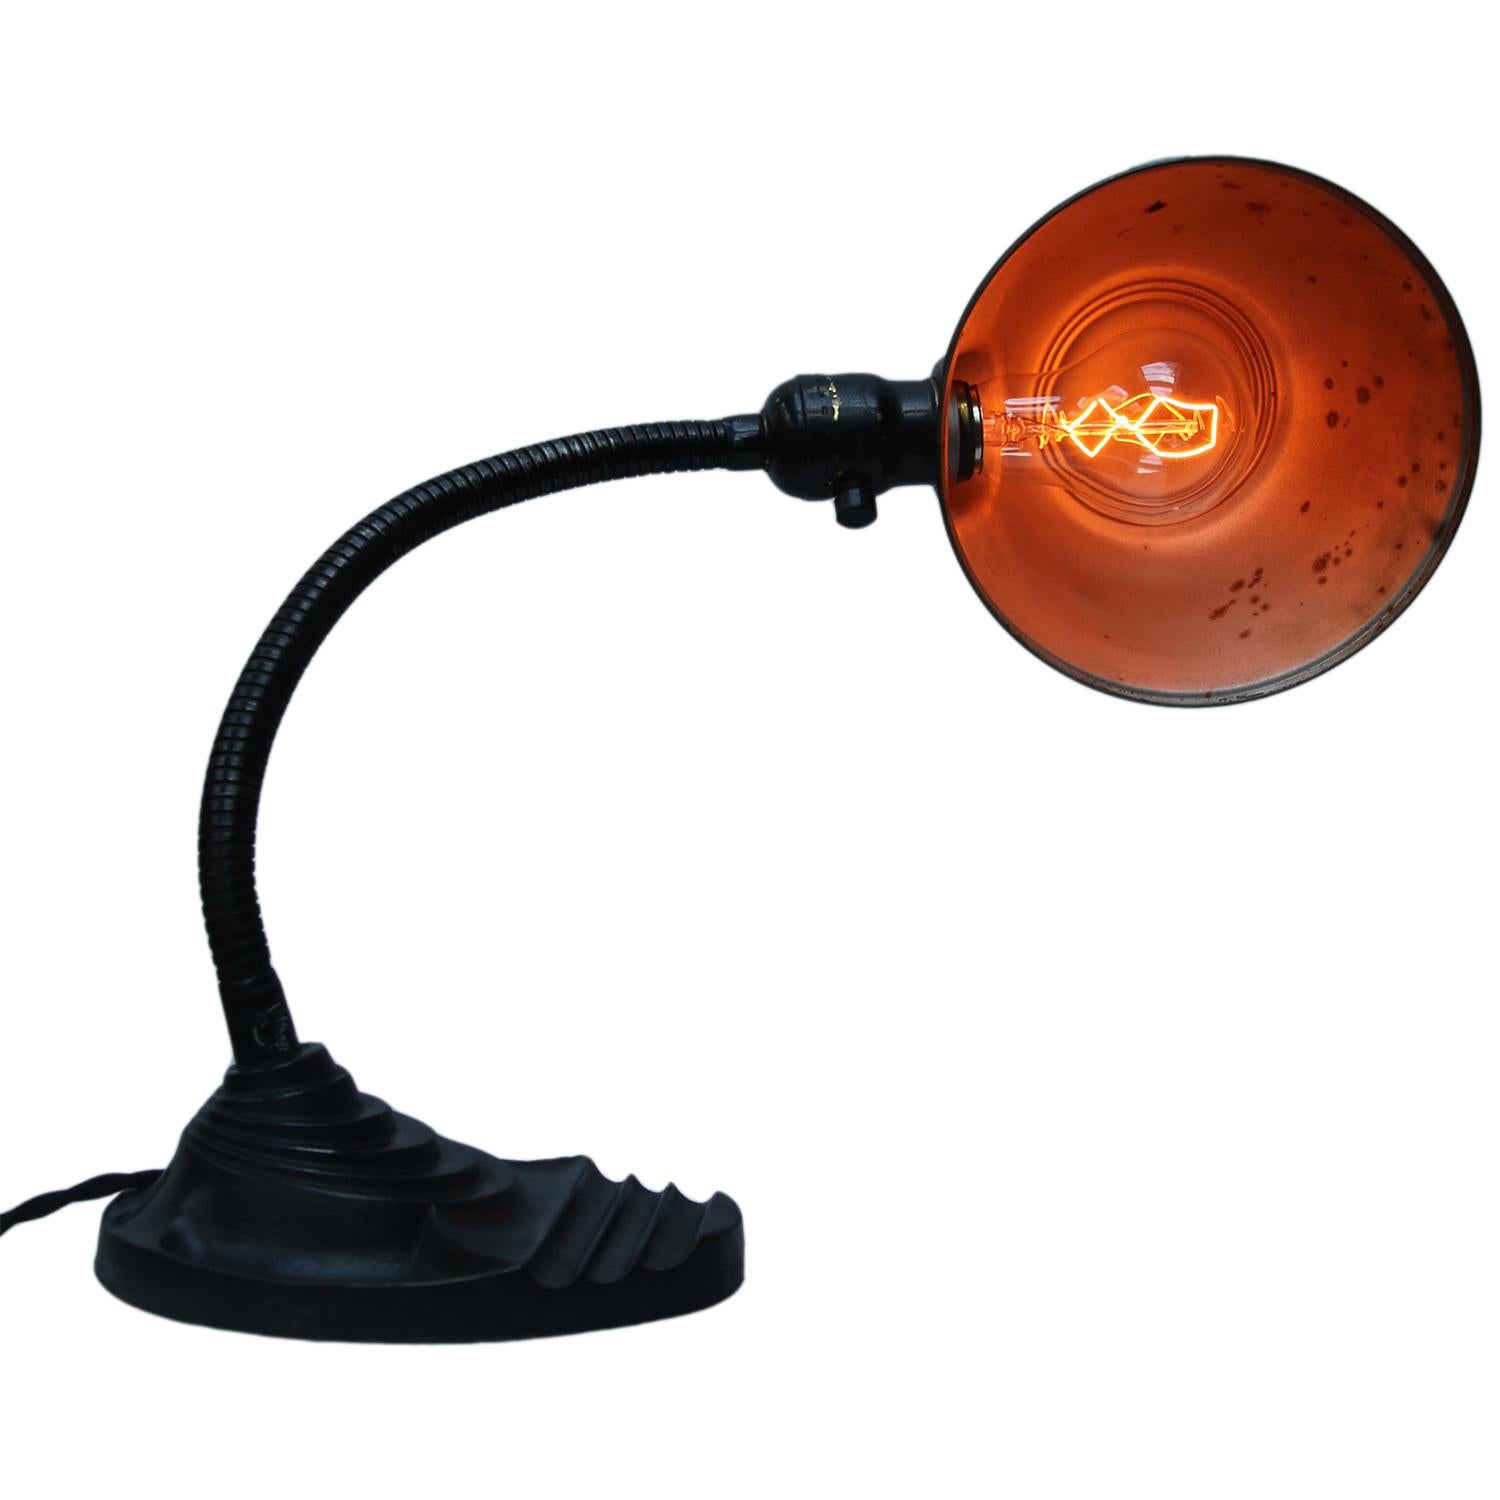 Black American goose neck desk light.
Flexible arm with metal shade.
Cast iron base. black cotton wire and plug.

Weight: 1.30 kg / 2.9 lb

Priced per individual item. All lamps have been made suitable by international standards for